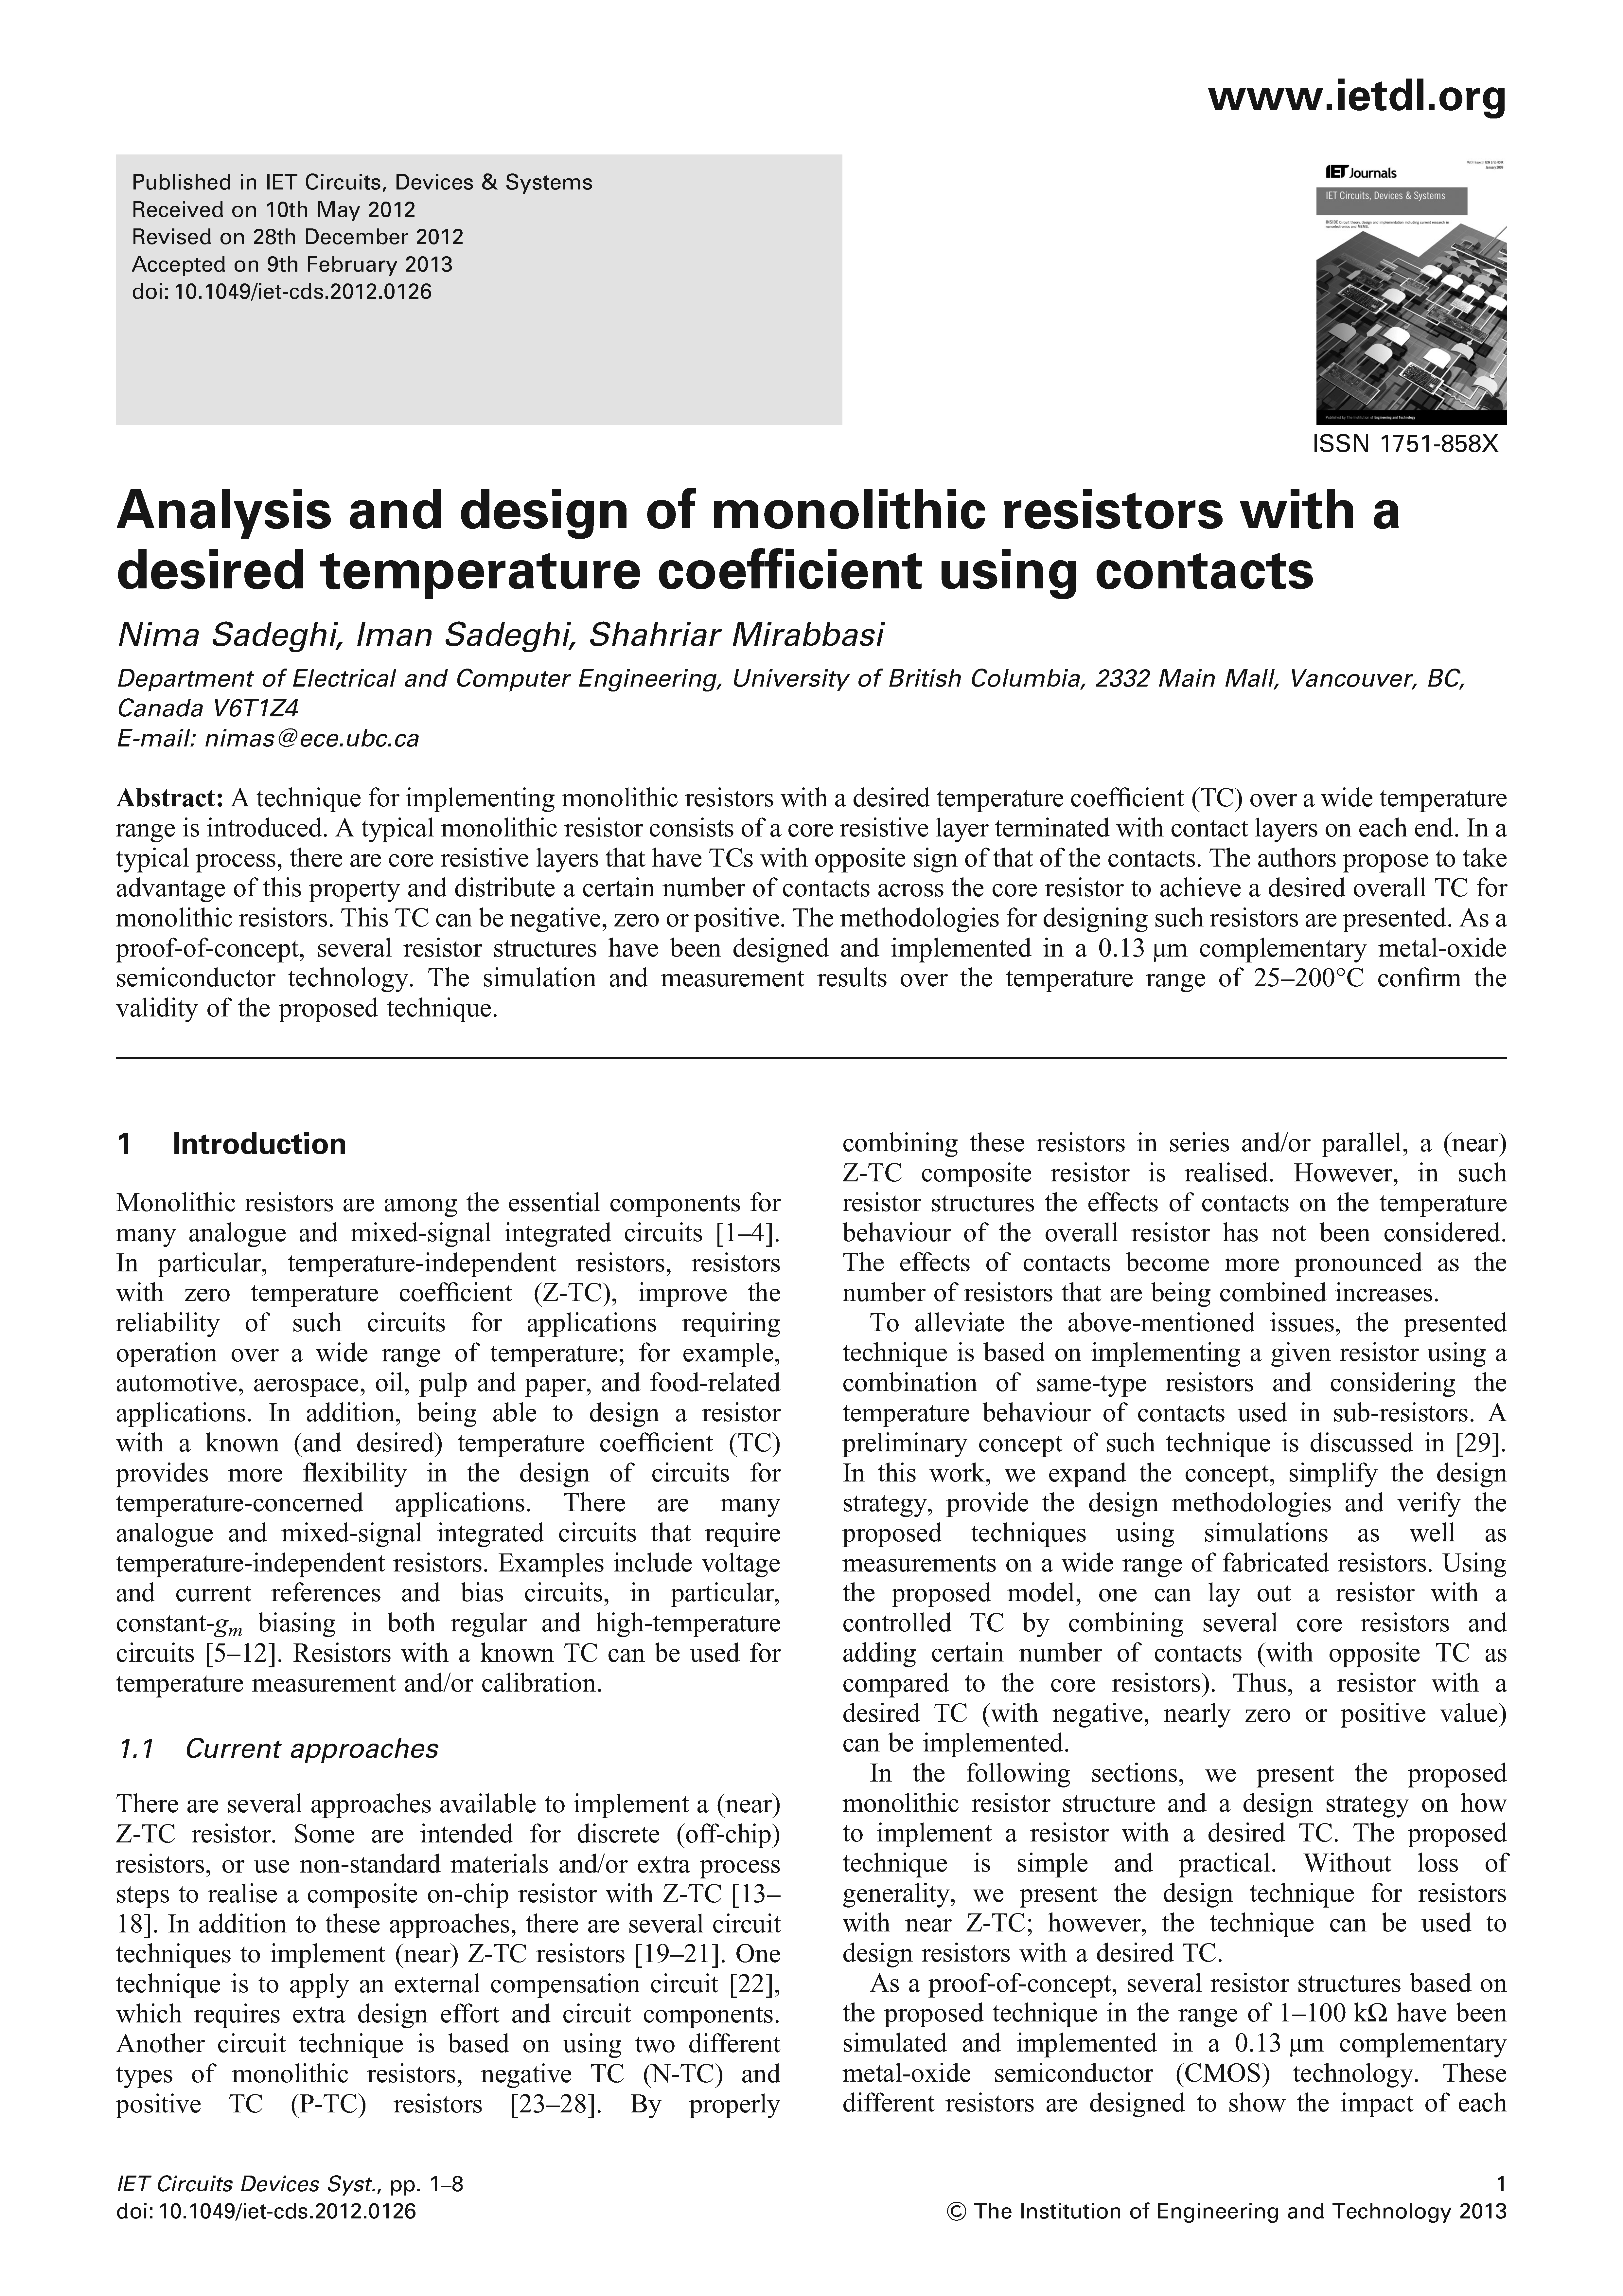 Analysis and Design of Monolithic Resistors with a Desired Temperature Coefficient Using Contacts Page 1